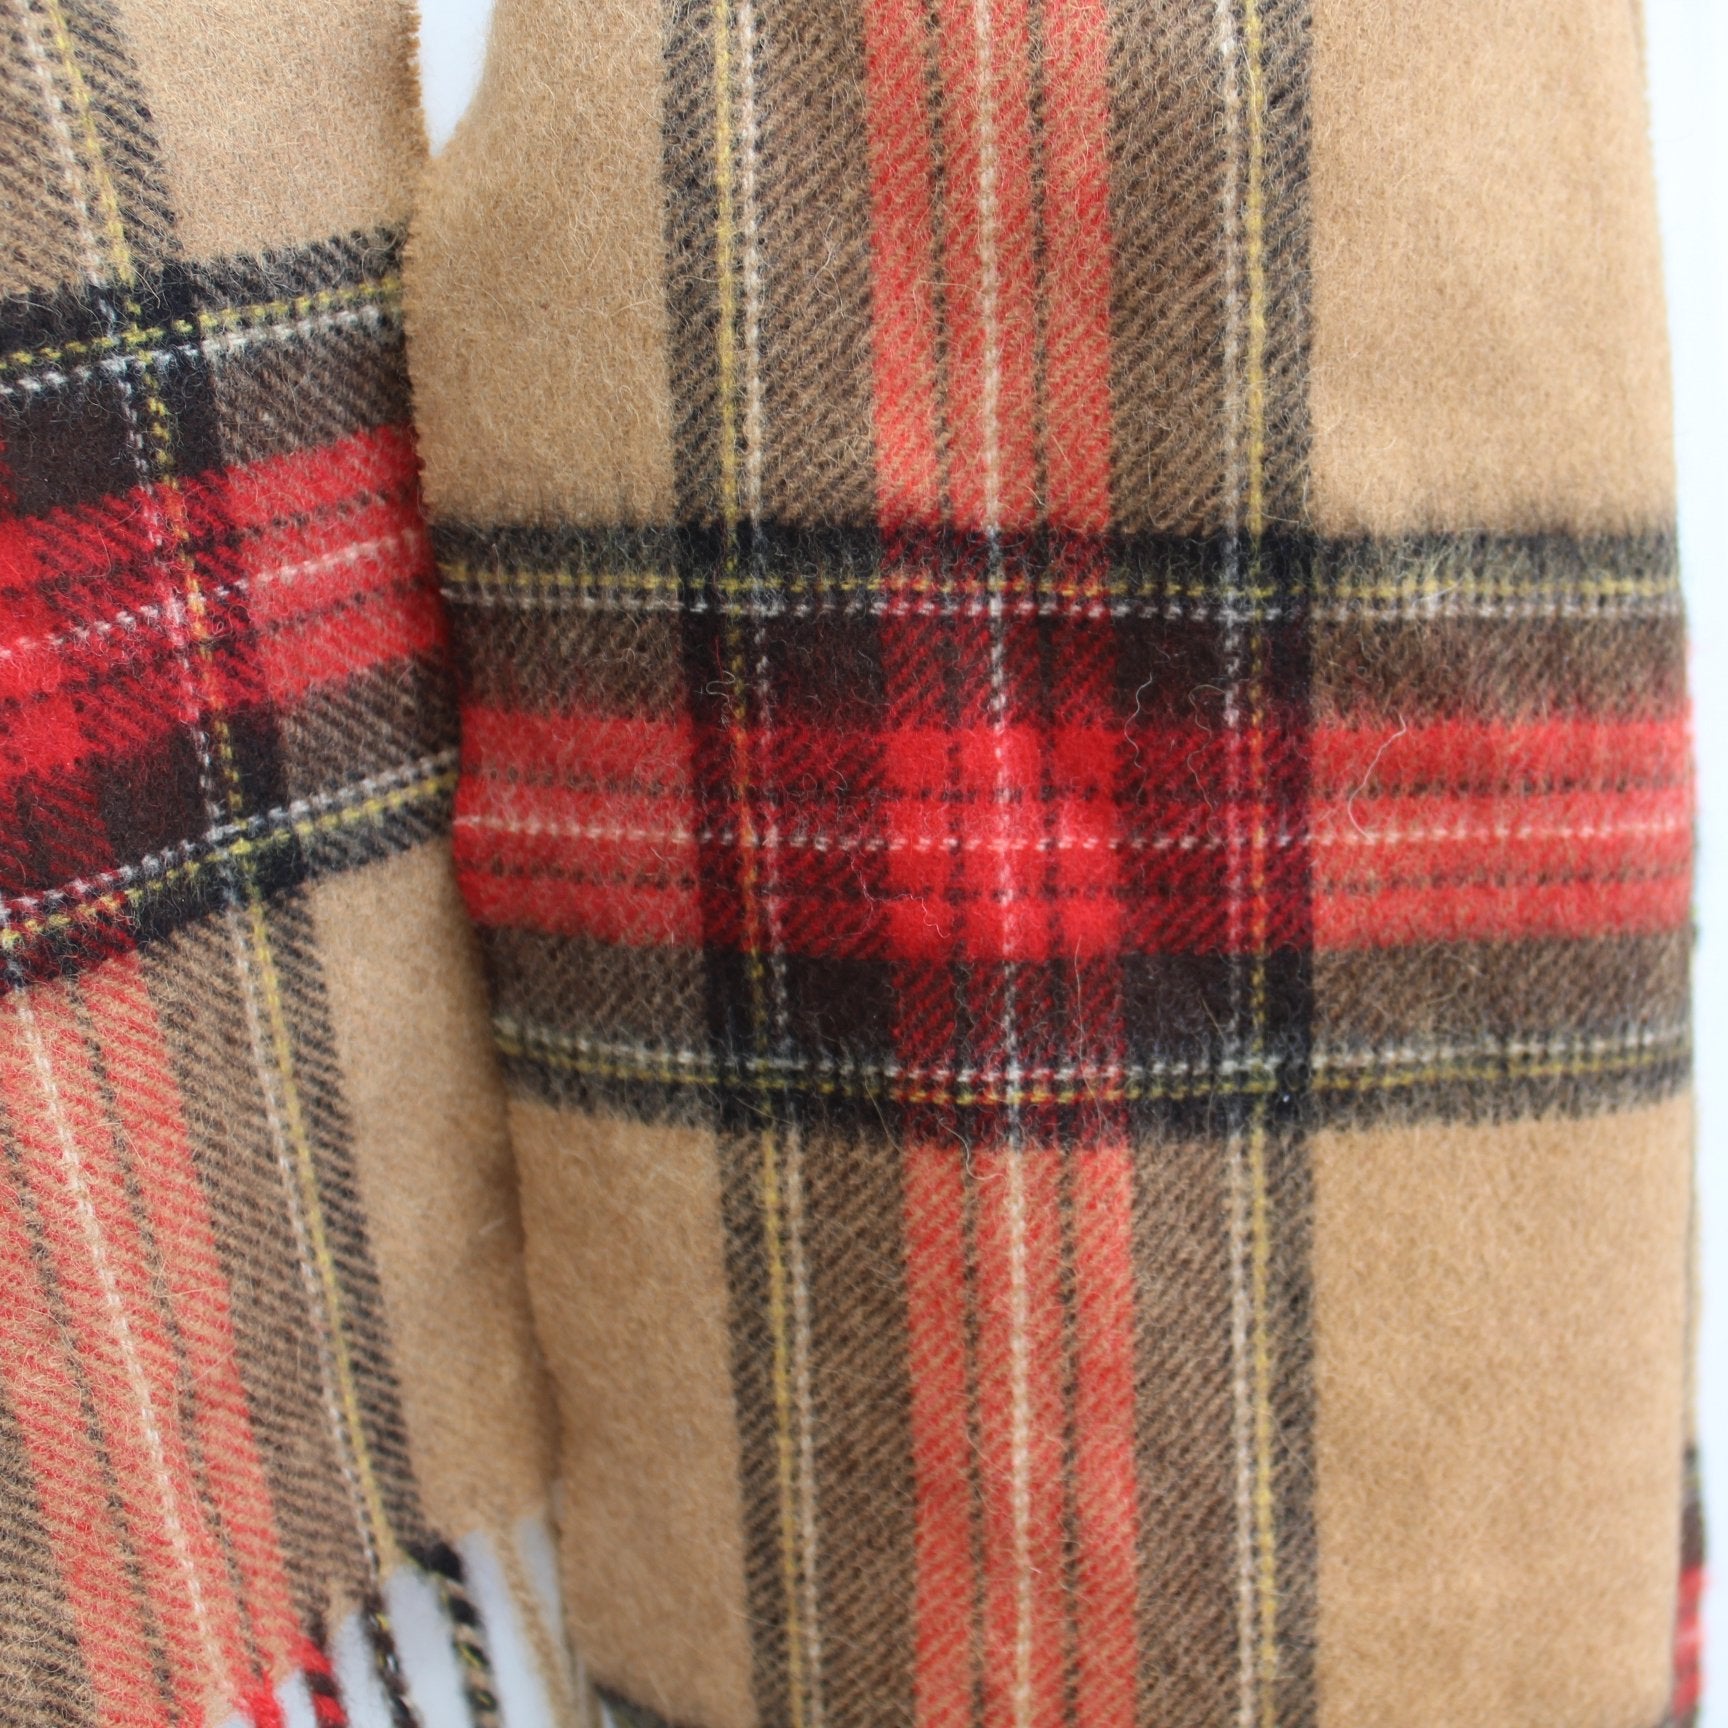 Neck Scarf 100% Cashmere Camel Red Plaid Bloomingdales Peterborough Row Made W Germany closeup fine fiber